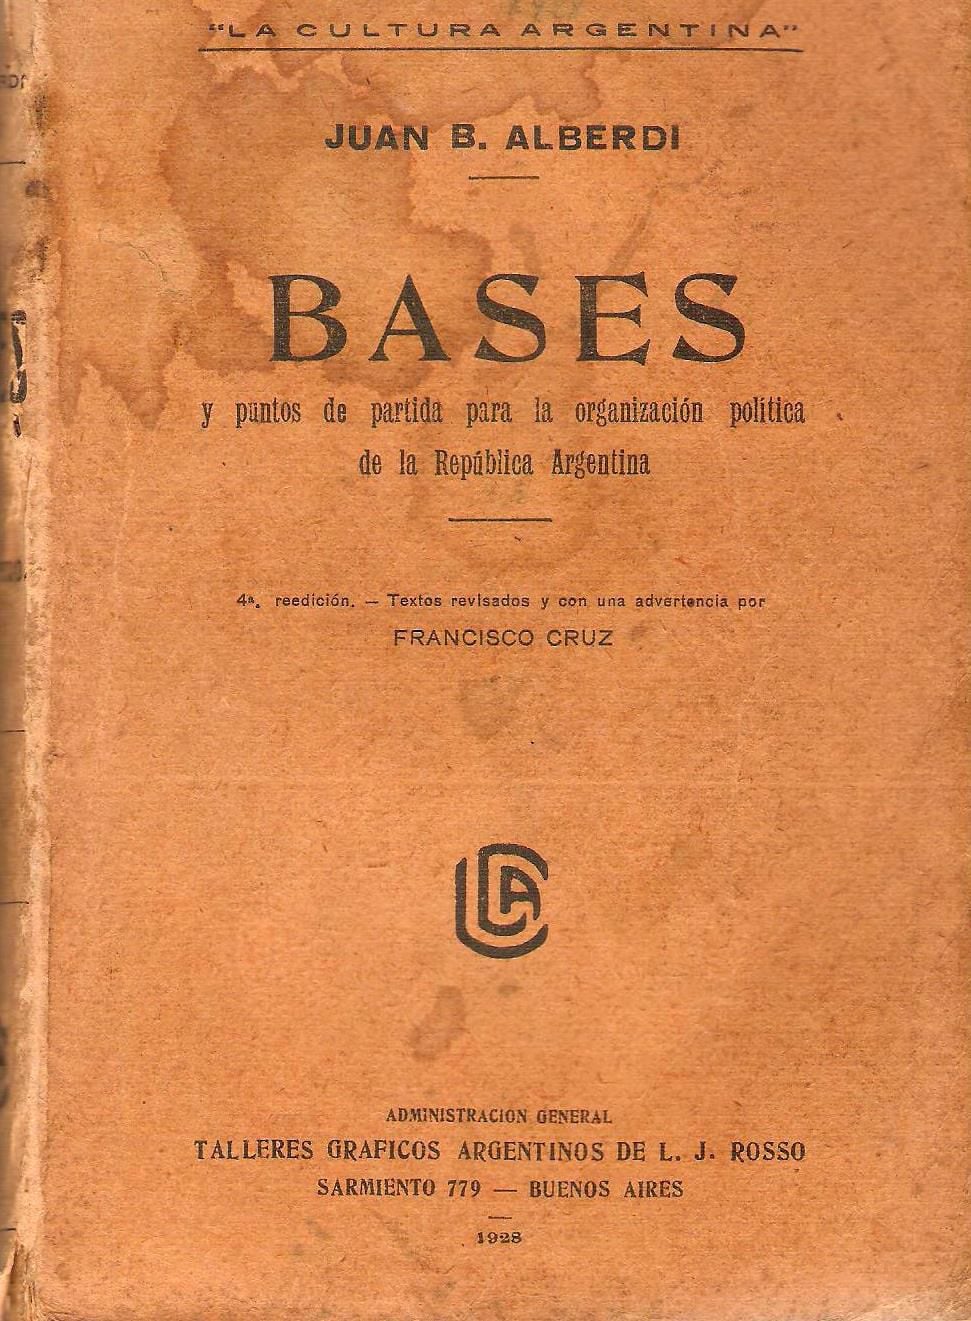 "My Bases book is a work of action", described Alberdi on the first page.it would endorse the constitution sanctioned in 1853